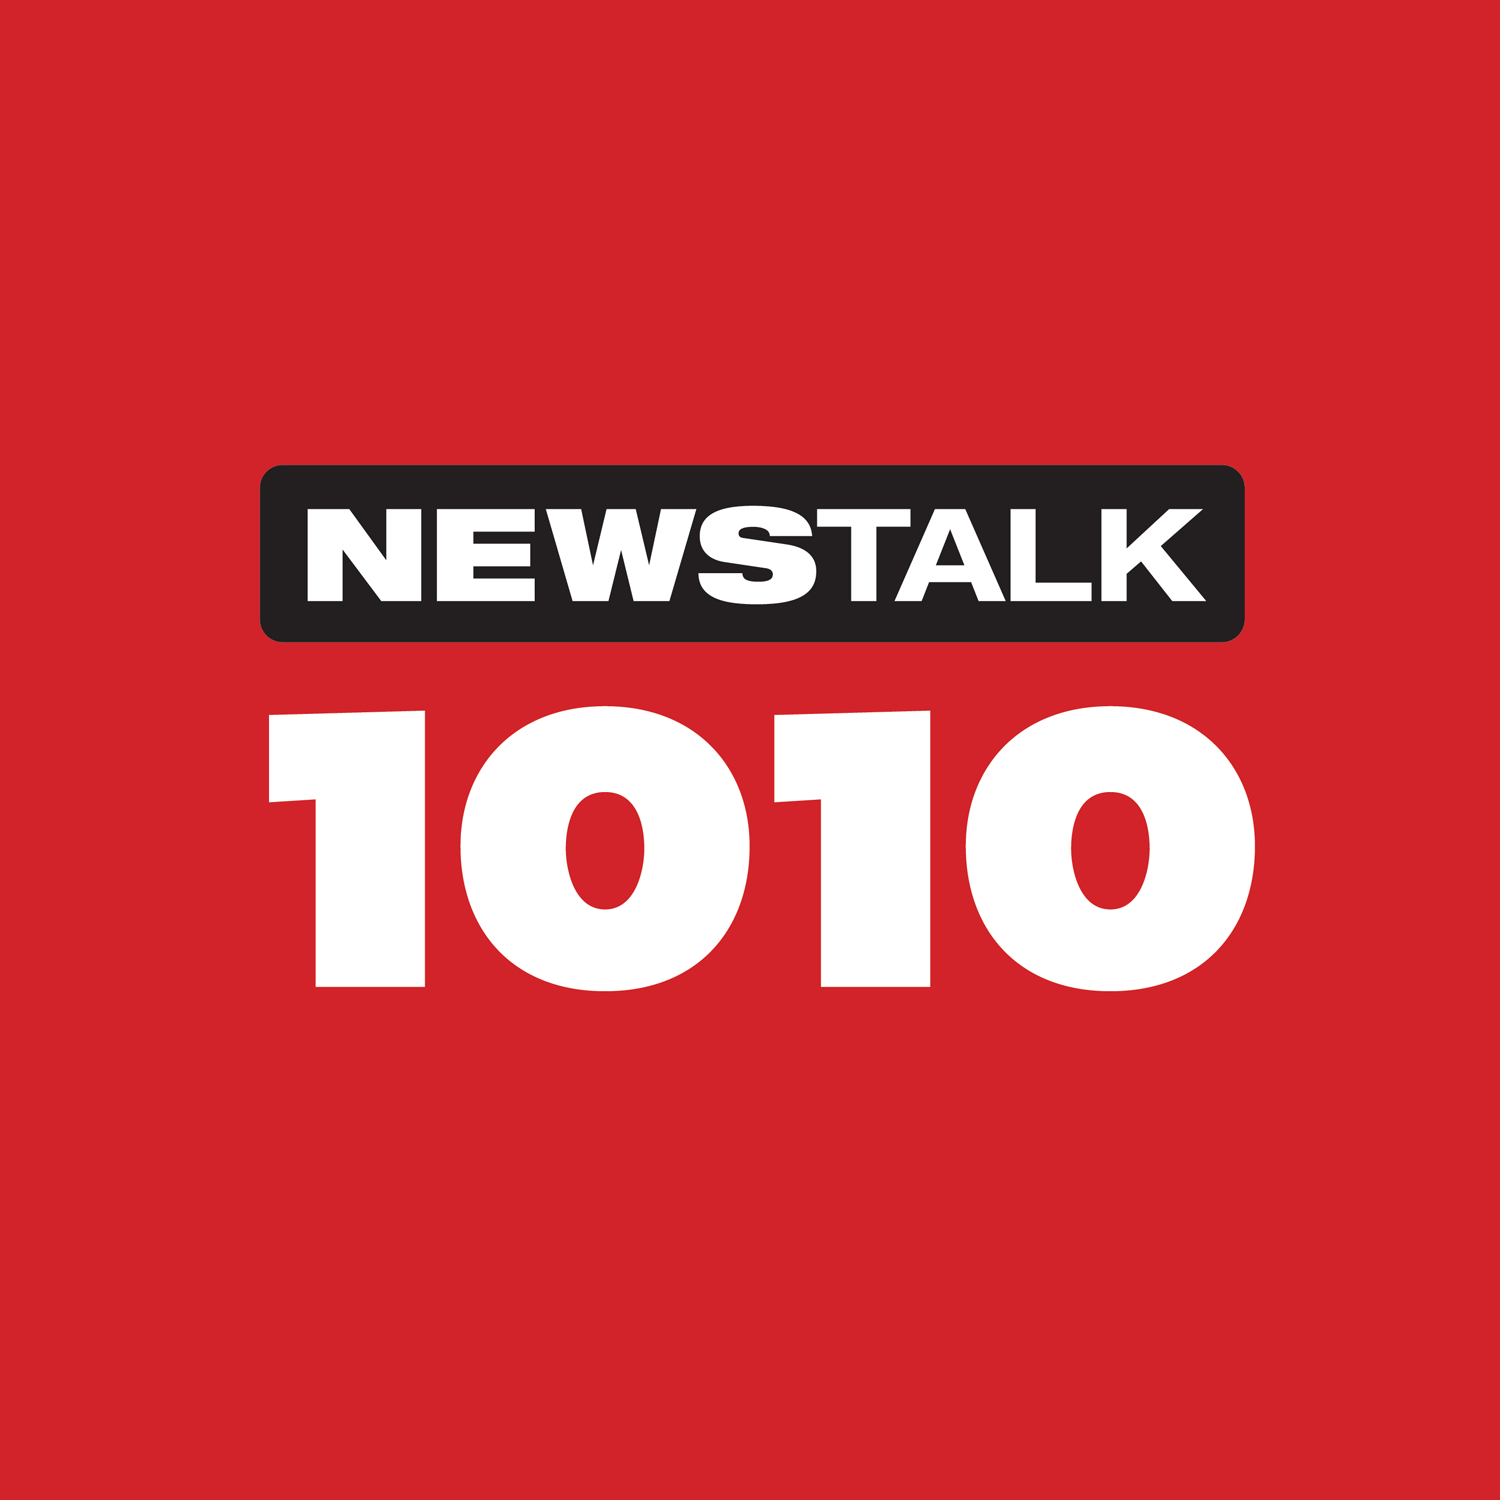 NEWSTALK 1010 crime specialist Mark Mendelson on Police to announce arrests in Toronto Pearson airport gold heist.